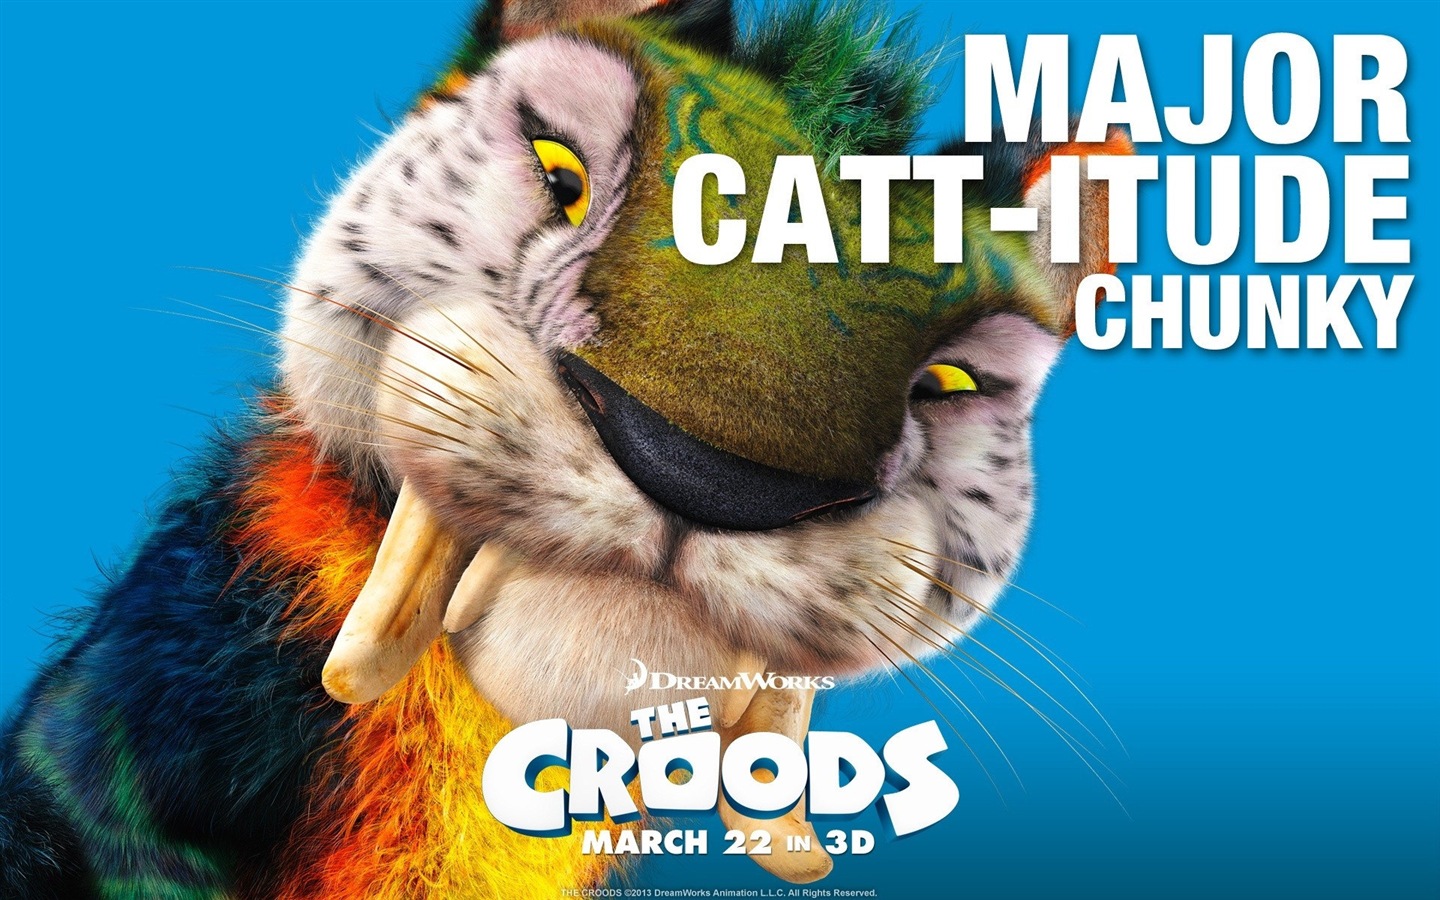 The Croods HD movie wallpapers #12 - 1440x900